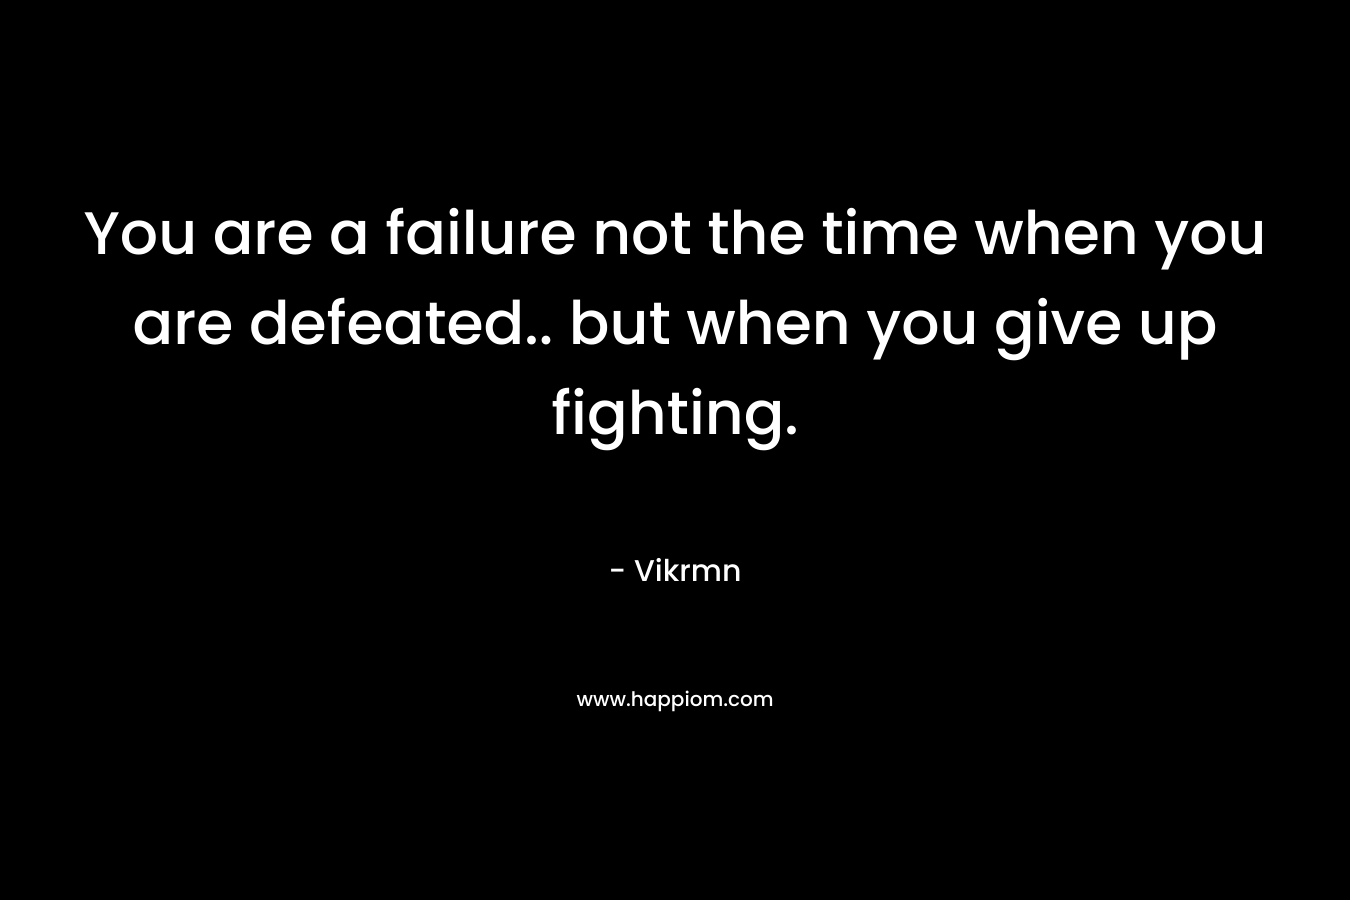 You are a failure not the time when you are defeated.. but when you give up fighting.